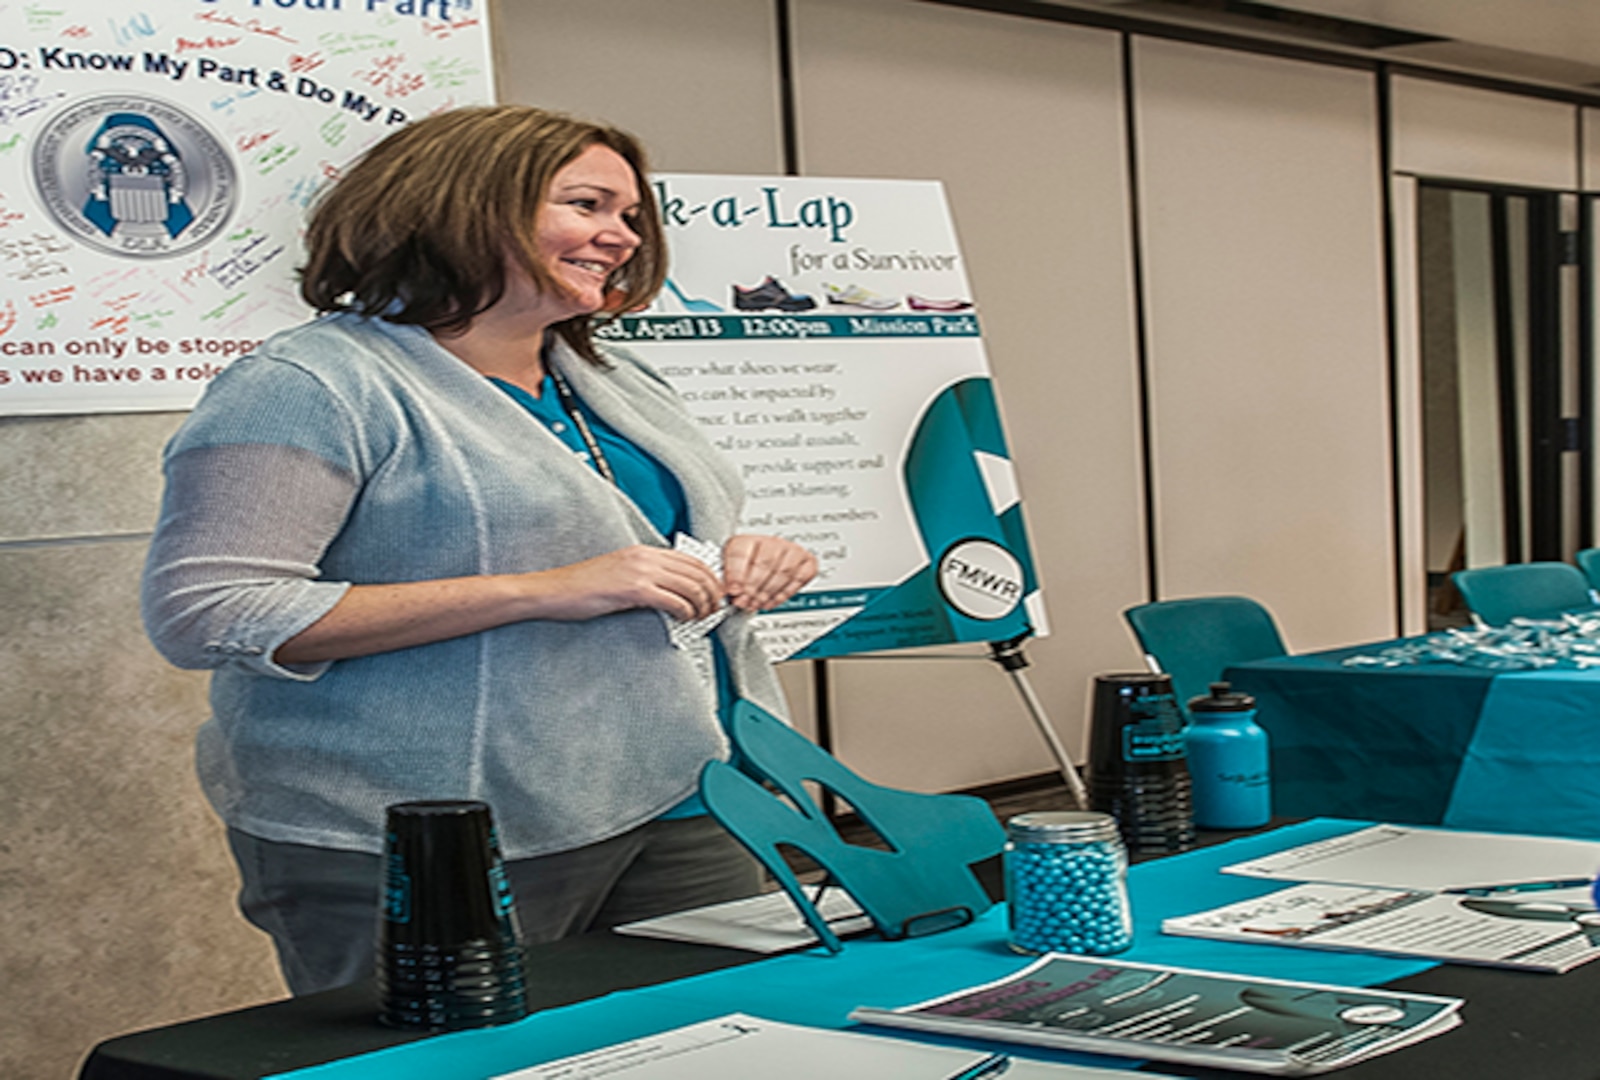 COLUMBUS, Ohio (April 6, 2016) Family advocacy program manager and sexual assault response coordinator Shari Murnahan helped organize an information fair as part of Sexual Assault Awareness and Prevention Month at Defense Supply Center Columbus. The fair highlighted a variety of events taking place throughout the month of April.